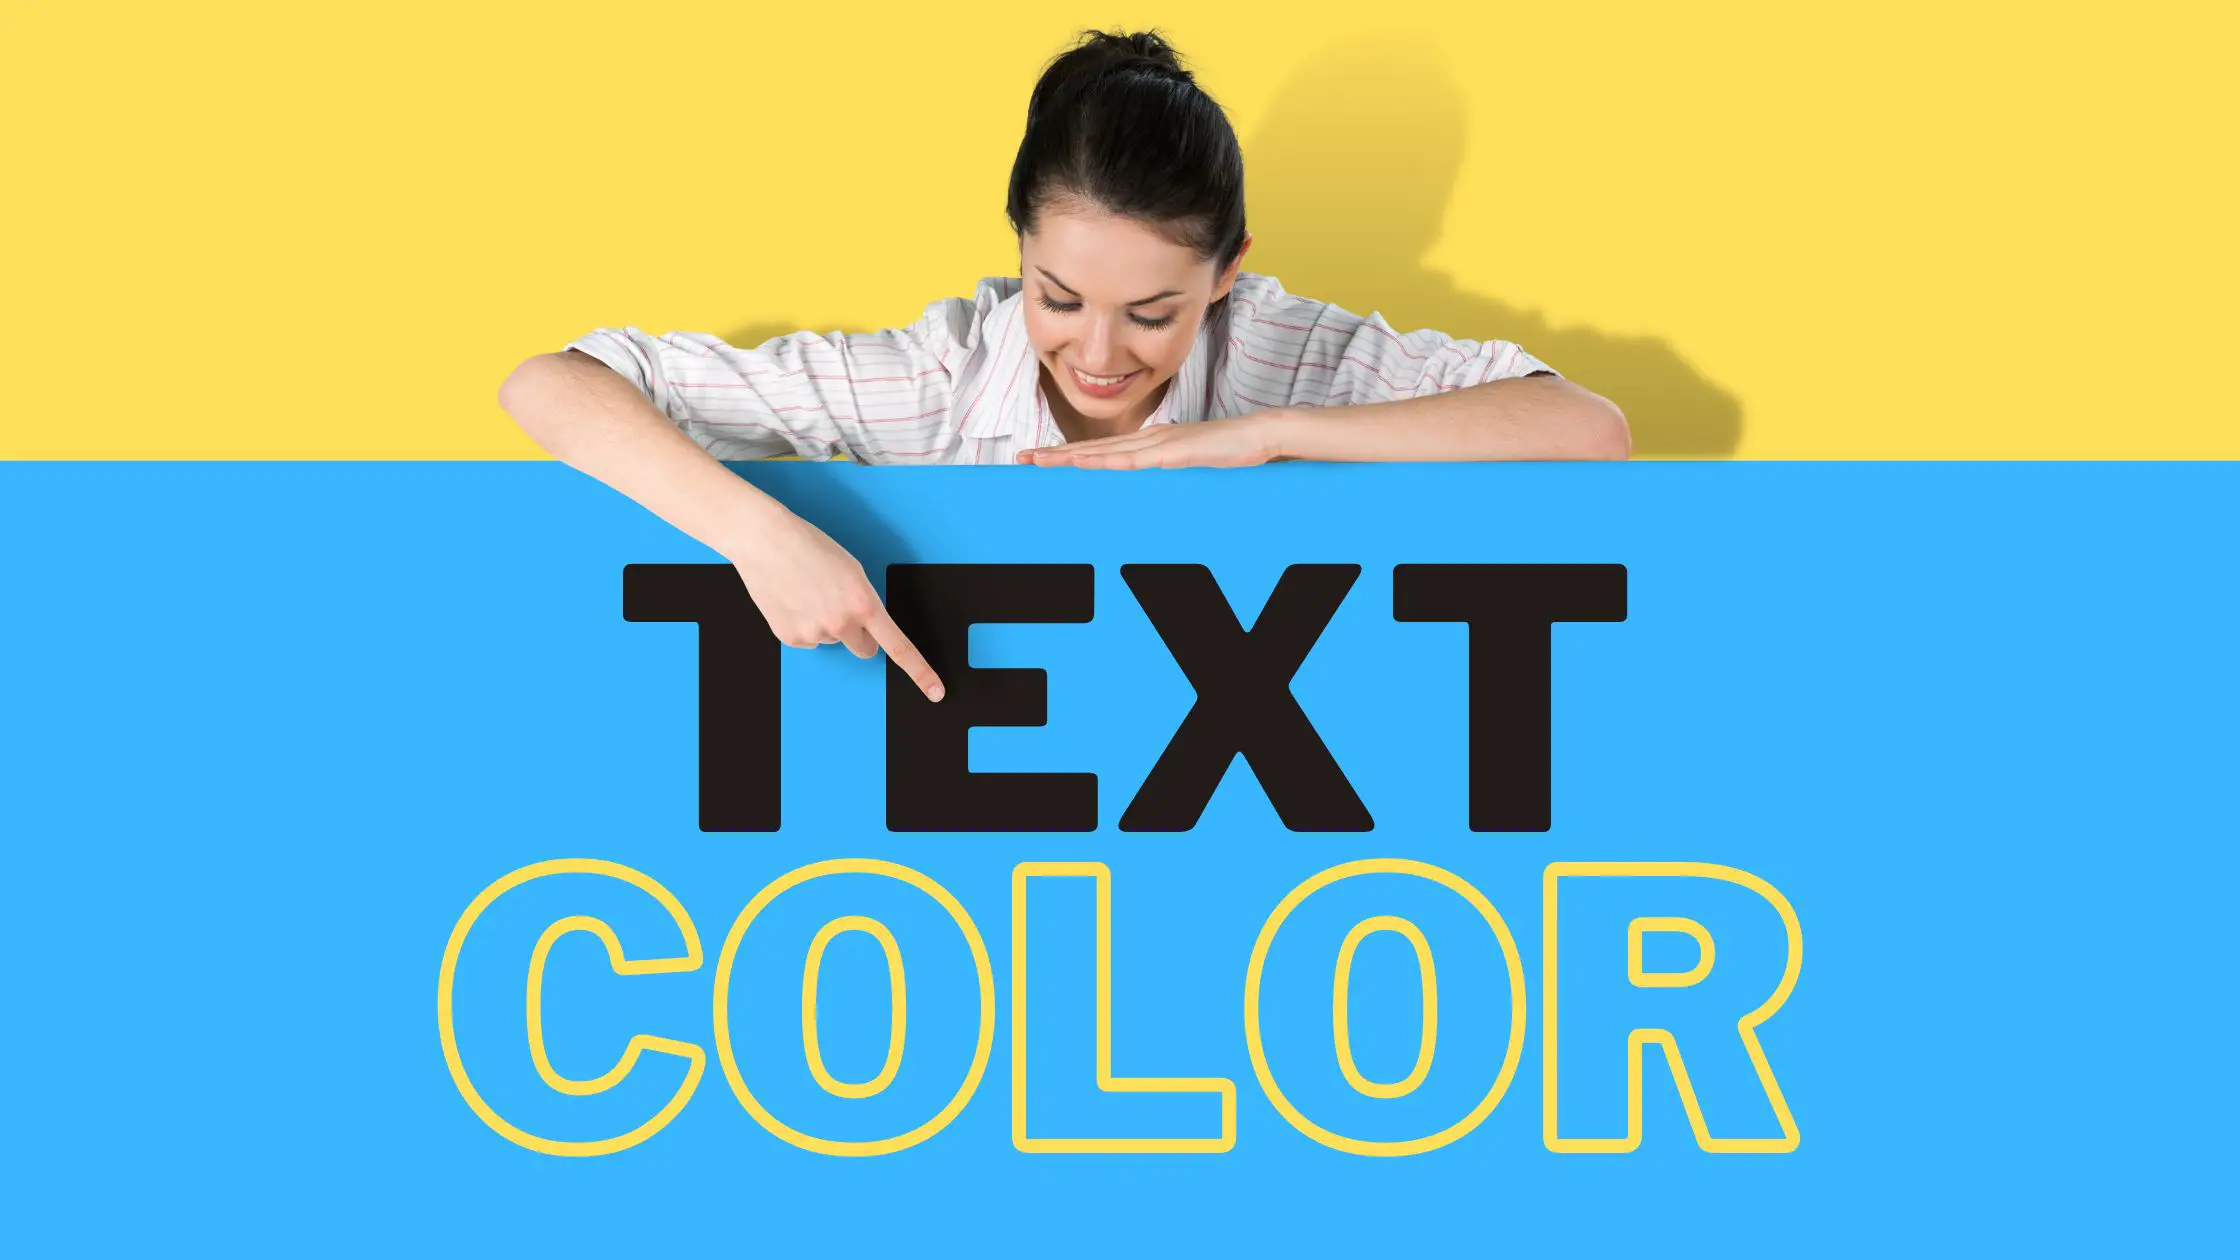 how-to-change-text-color-in-canva-with-screenshots-maker-s-aid